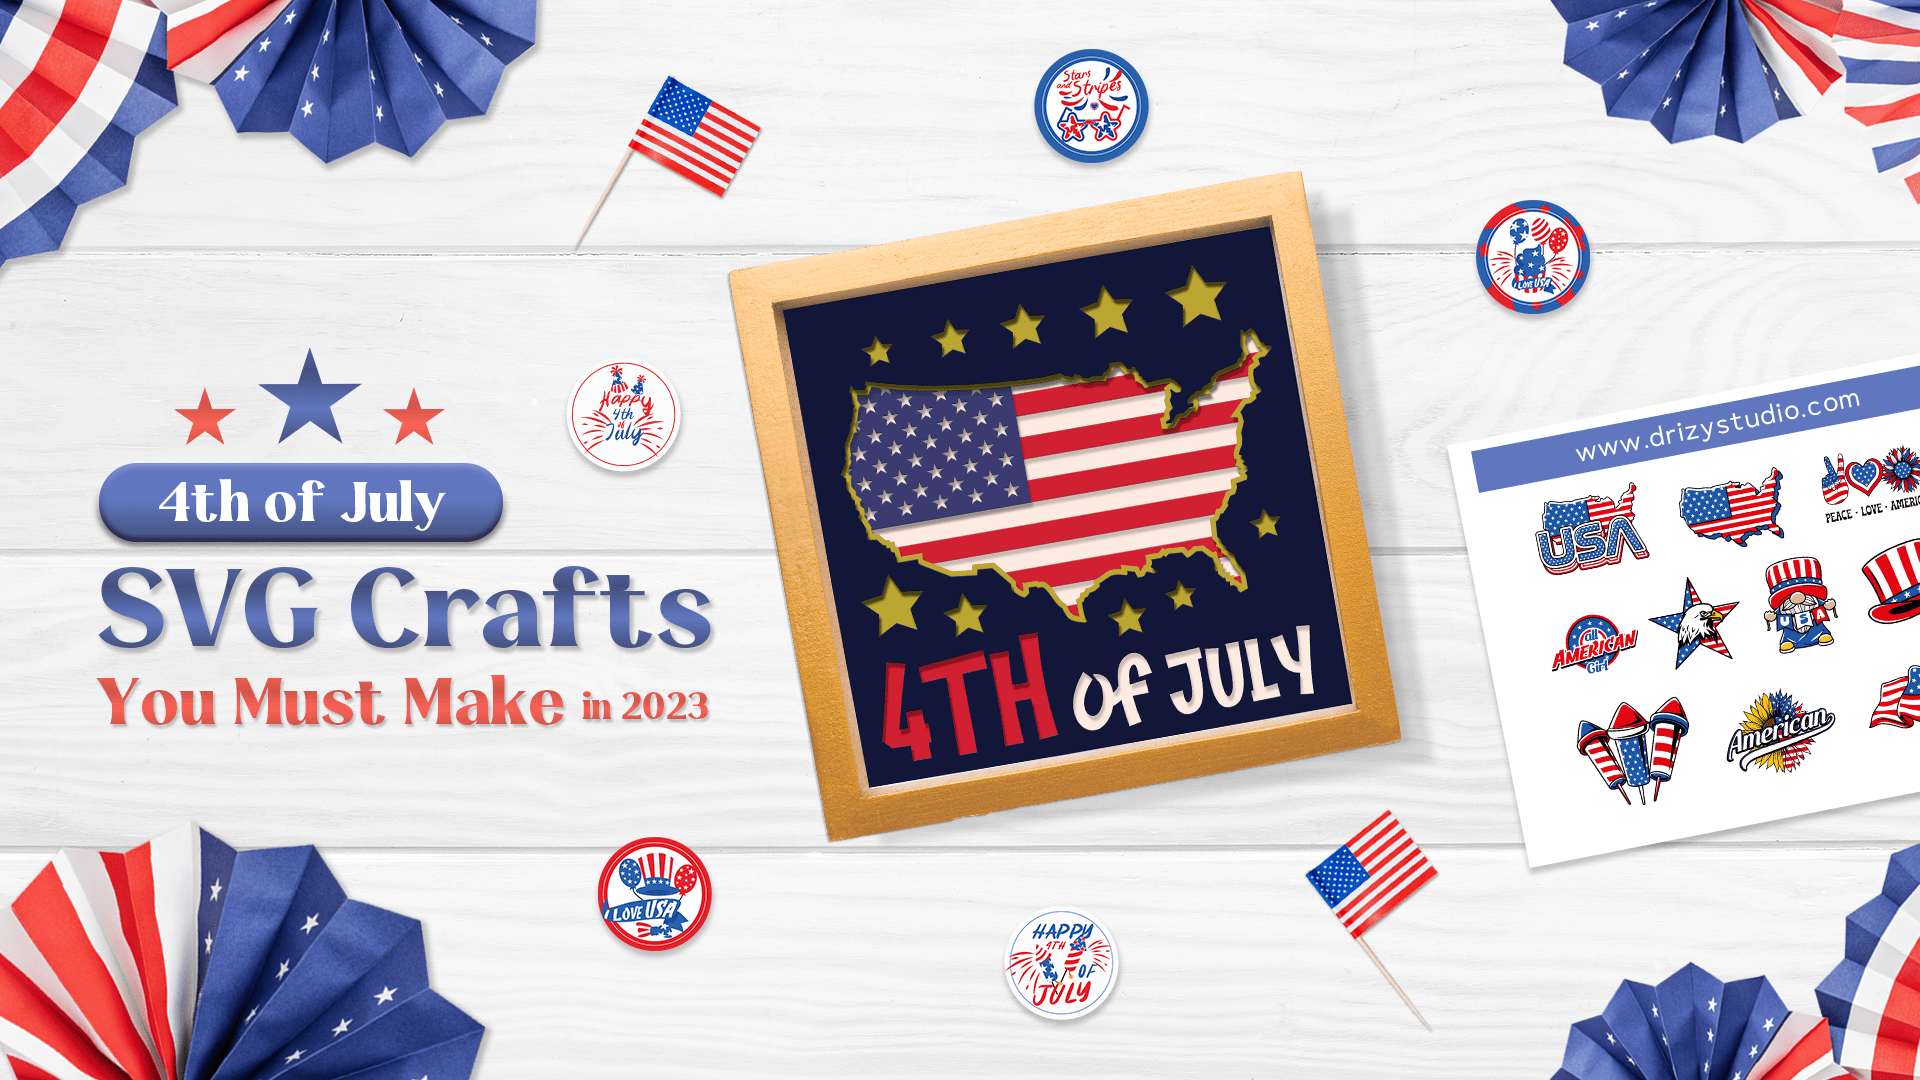 4th of July SVG Crafts You Must Make in 2023